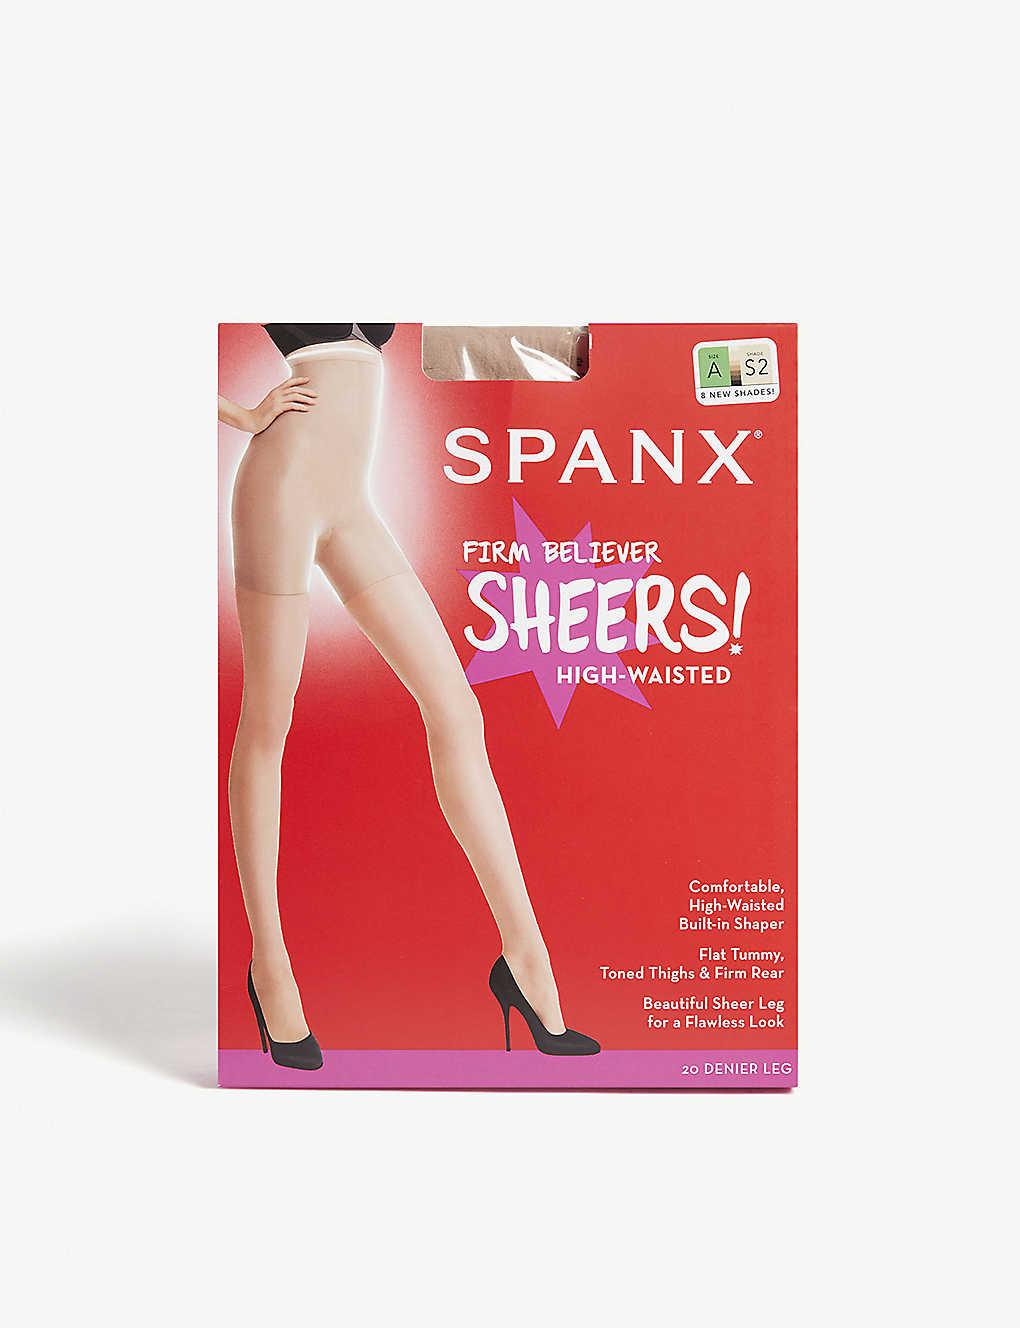 Spanx Firm Believer High-Waisted Sheers